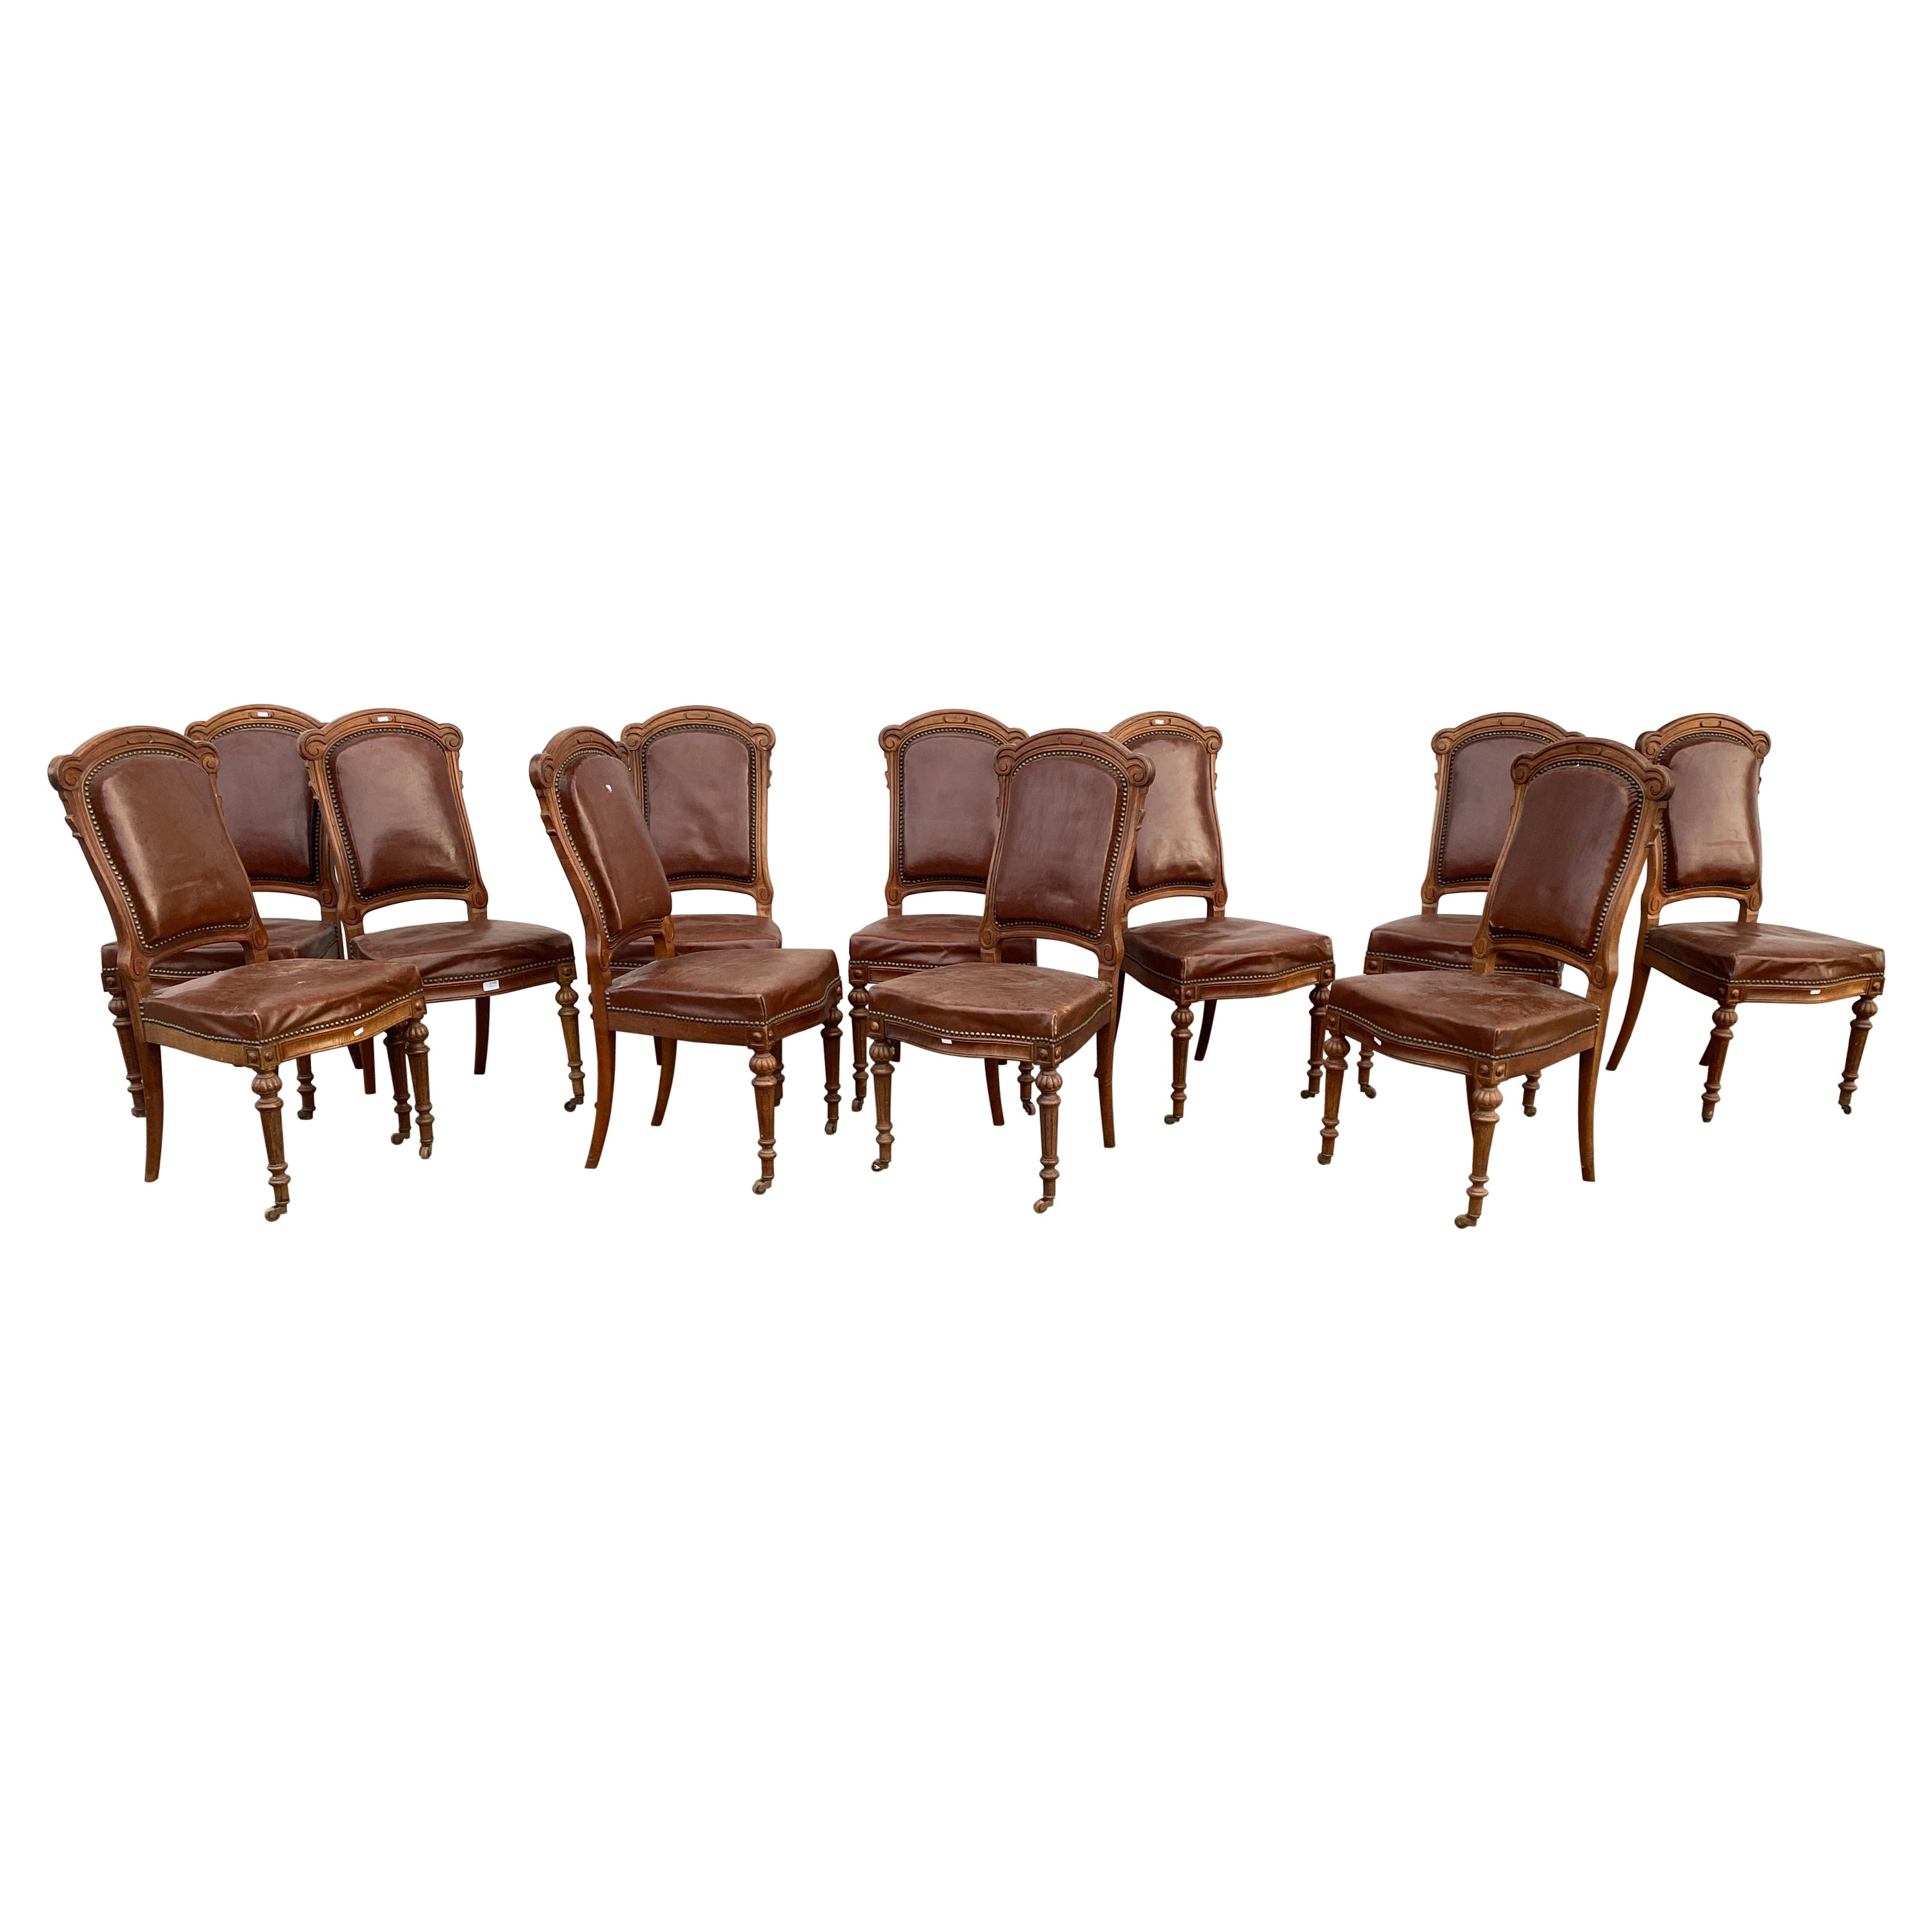 Rare suite of 12 Louis Philipe period chairs in oak and leather, 19th century  For Sale